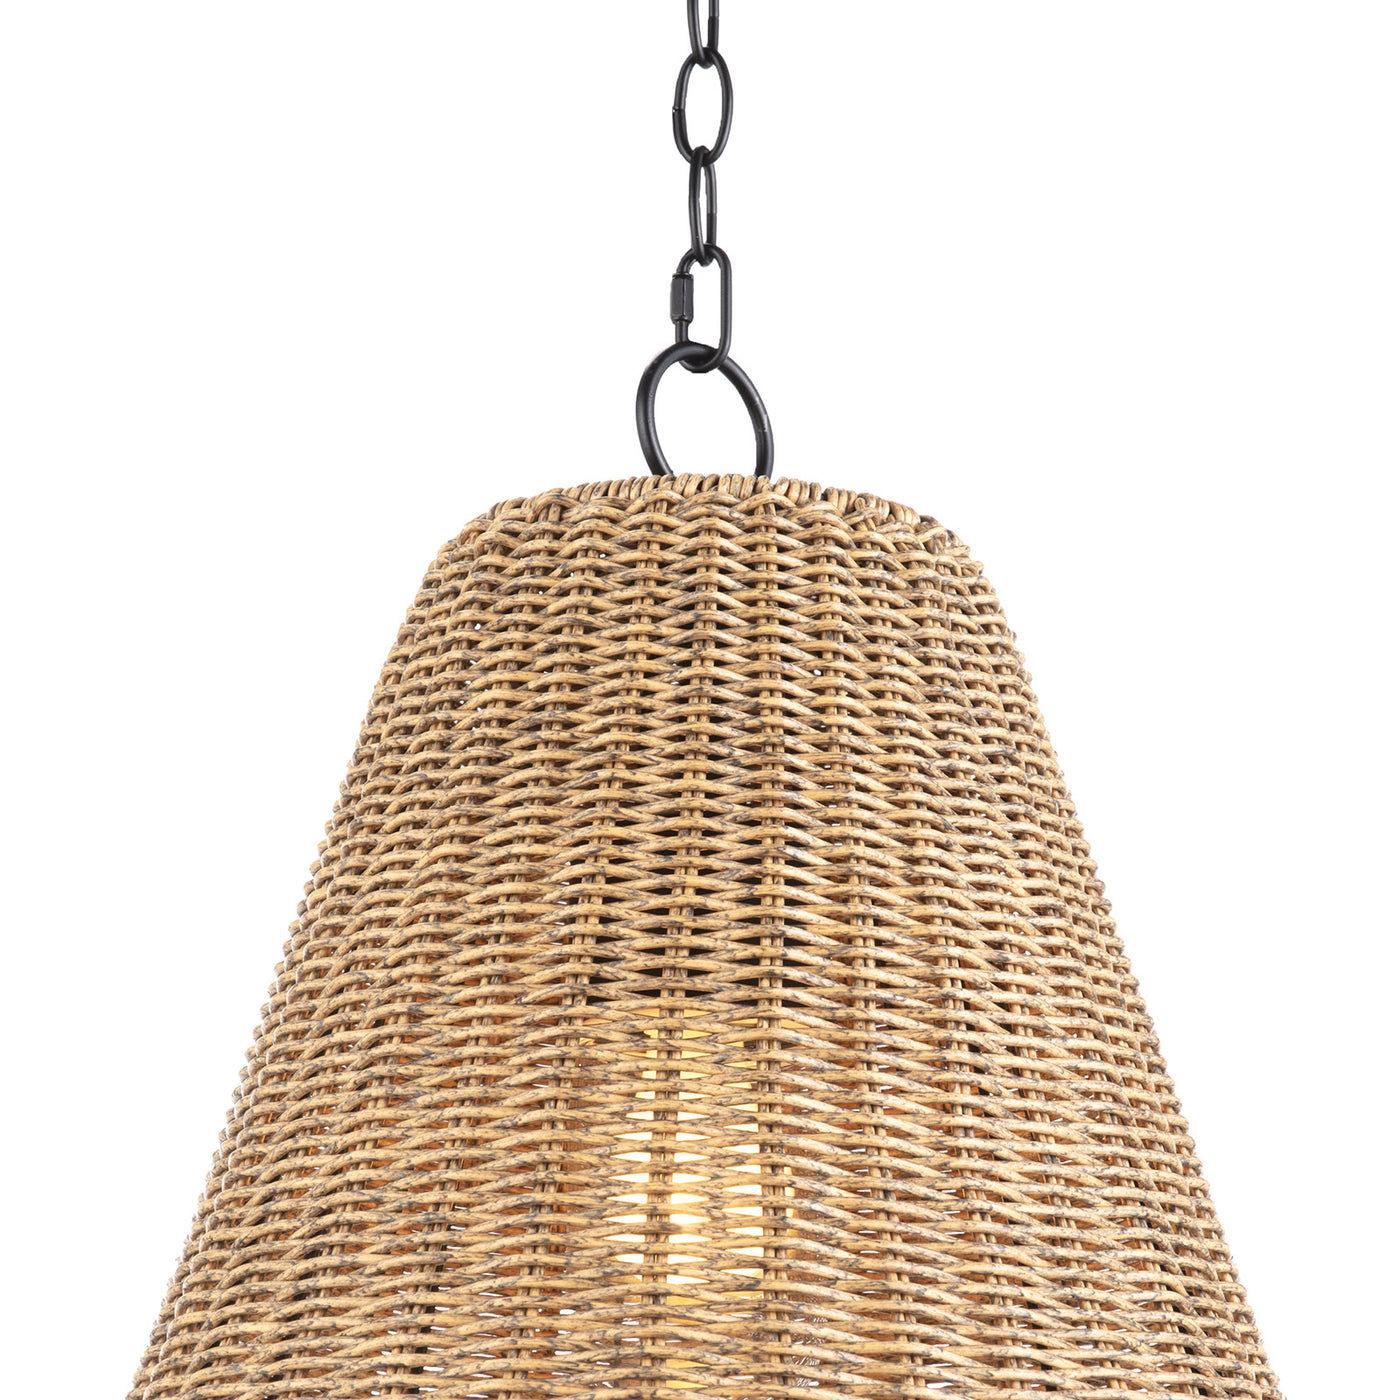 Summer Outdoor Pendant Small (Weathered Natural)